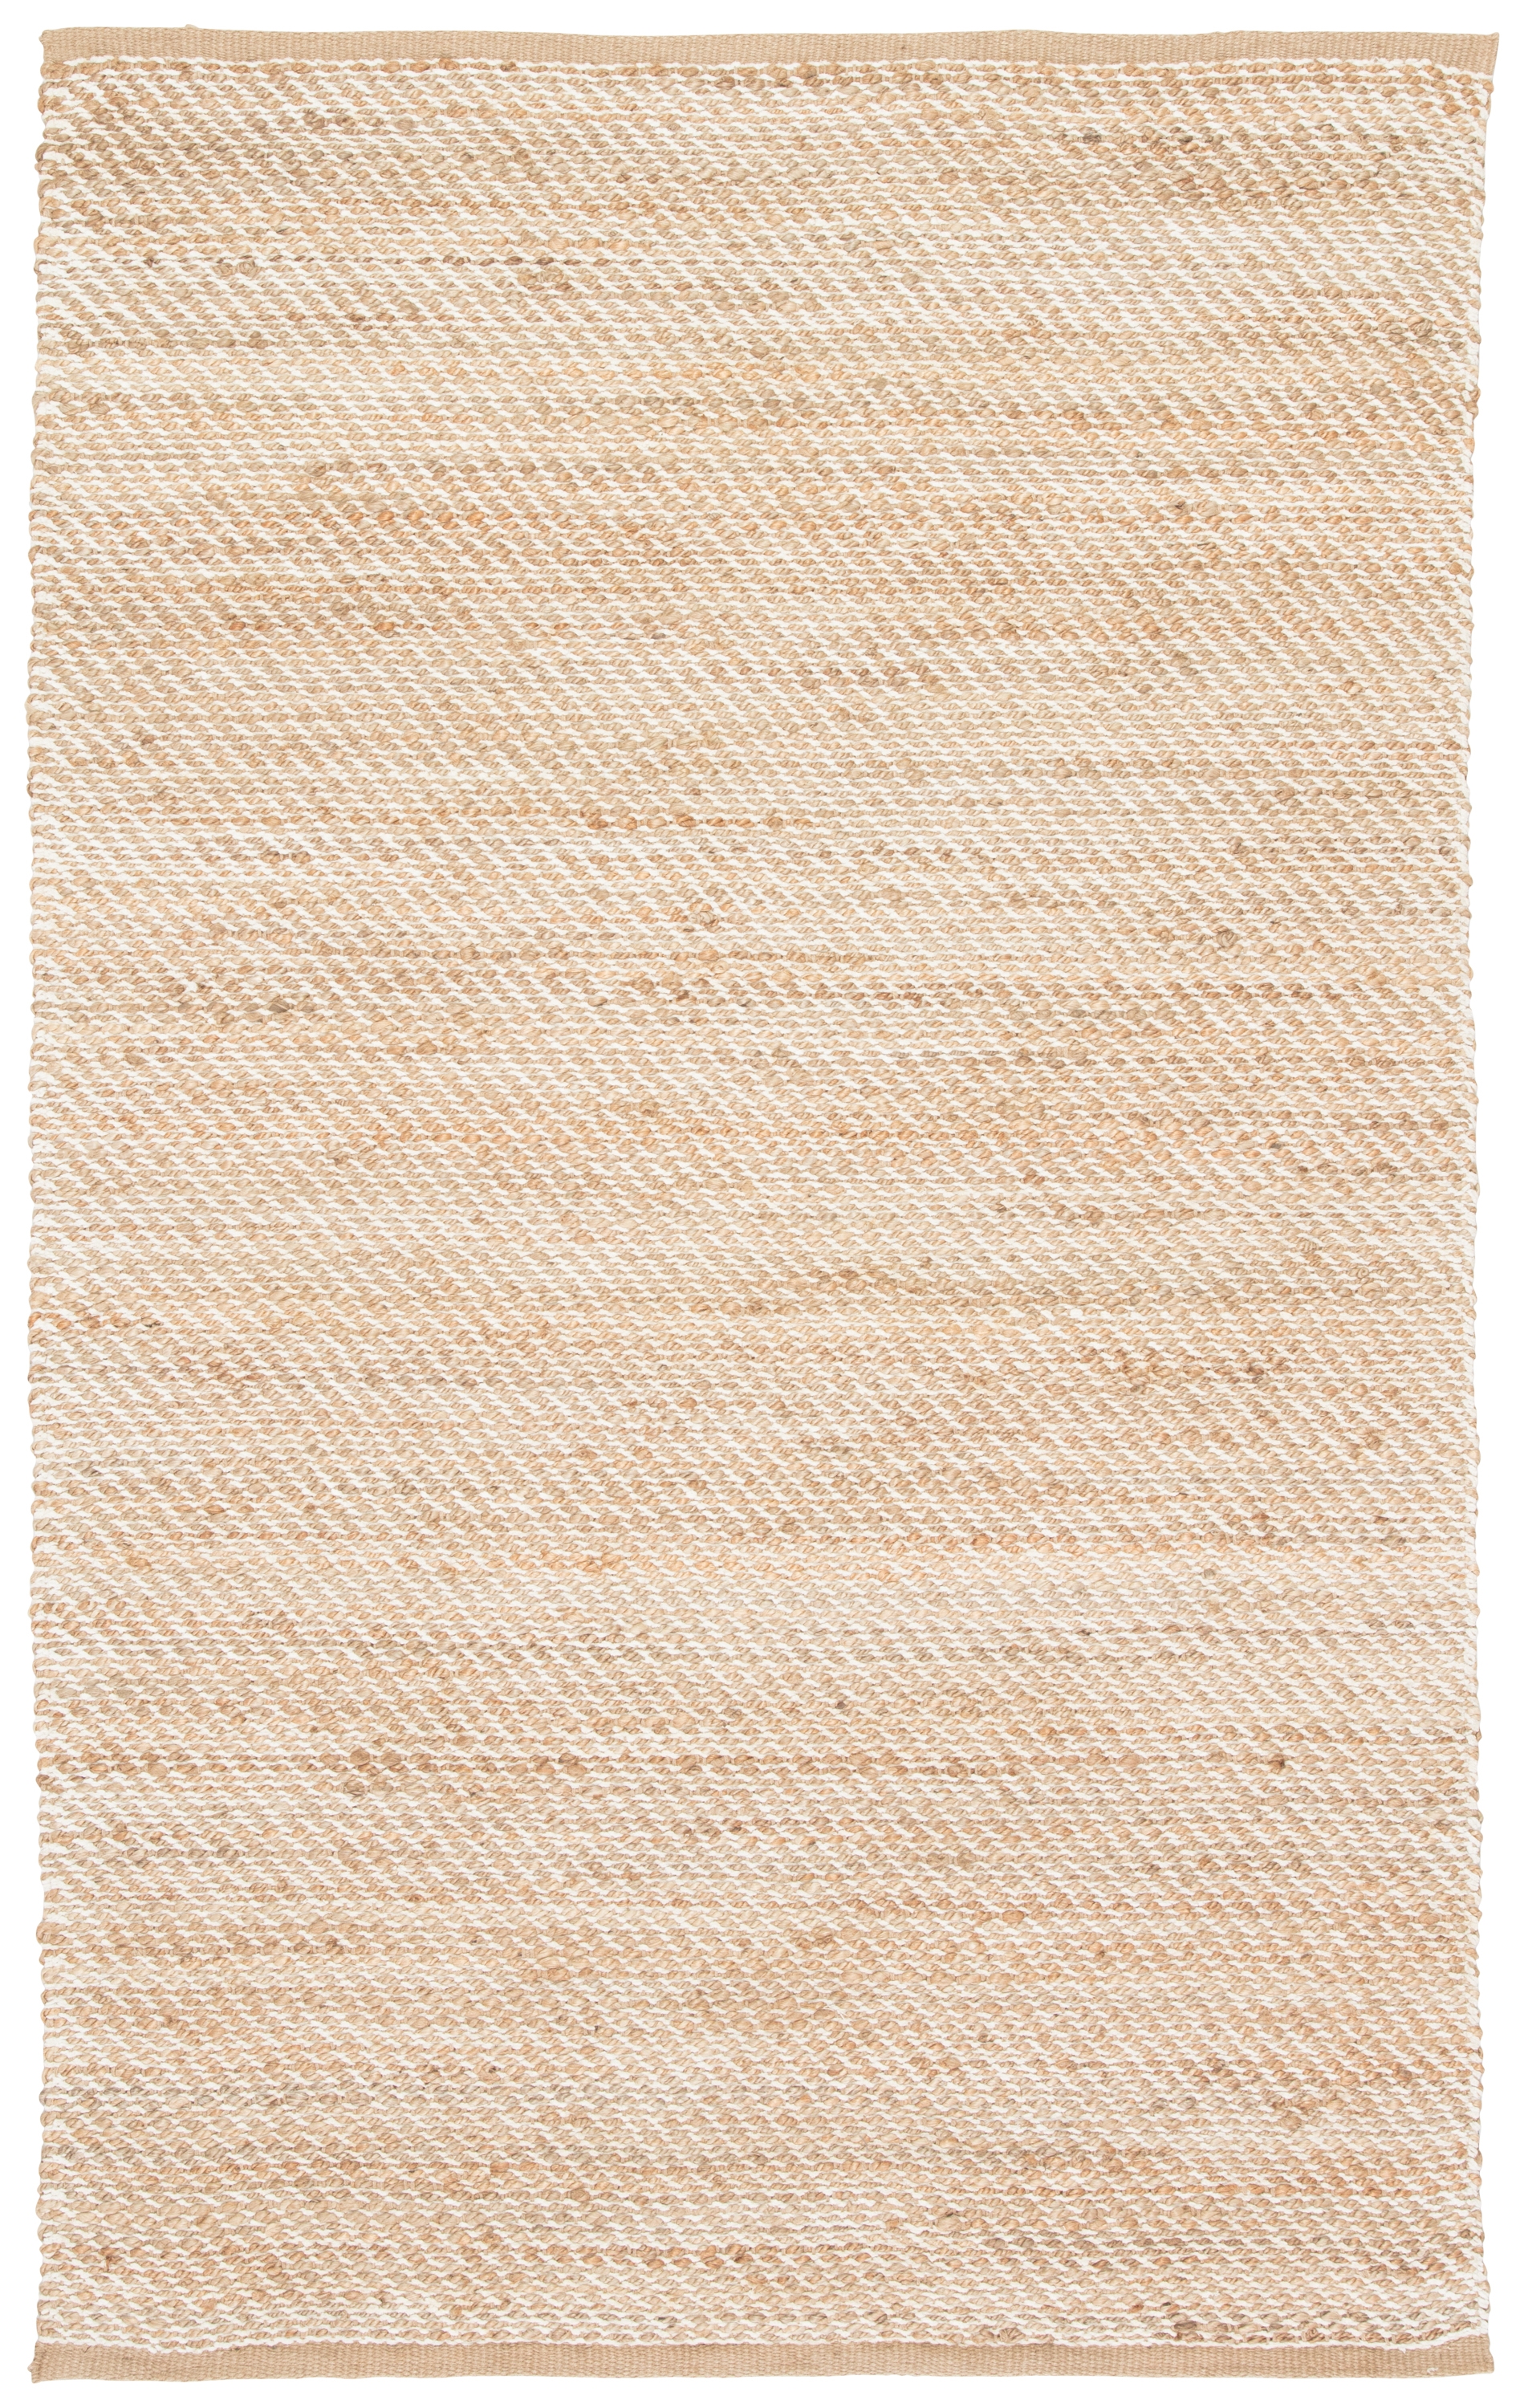 Diagonal Weave Natural Solid Beige/ White Area Rug (8' X 10') - Image 0